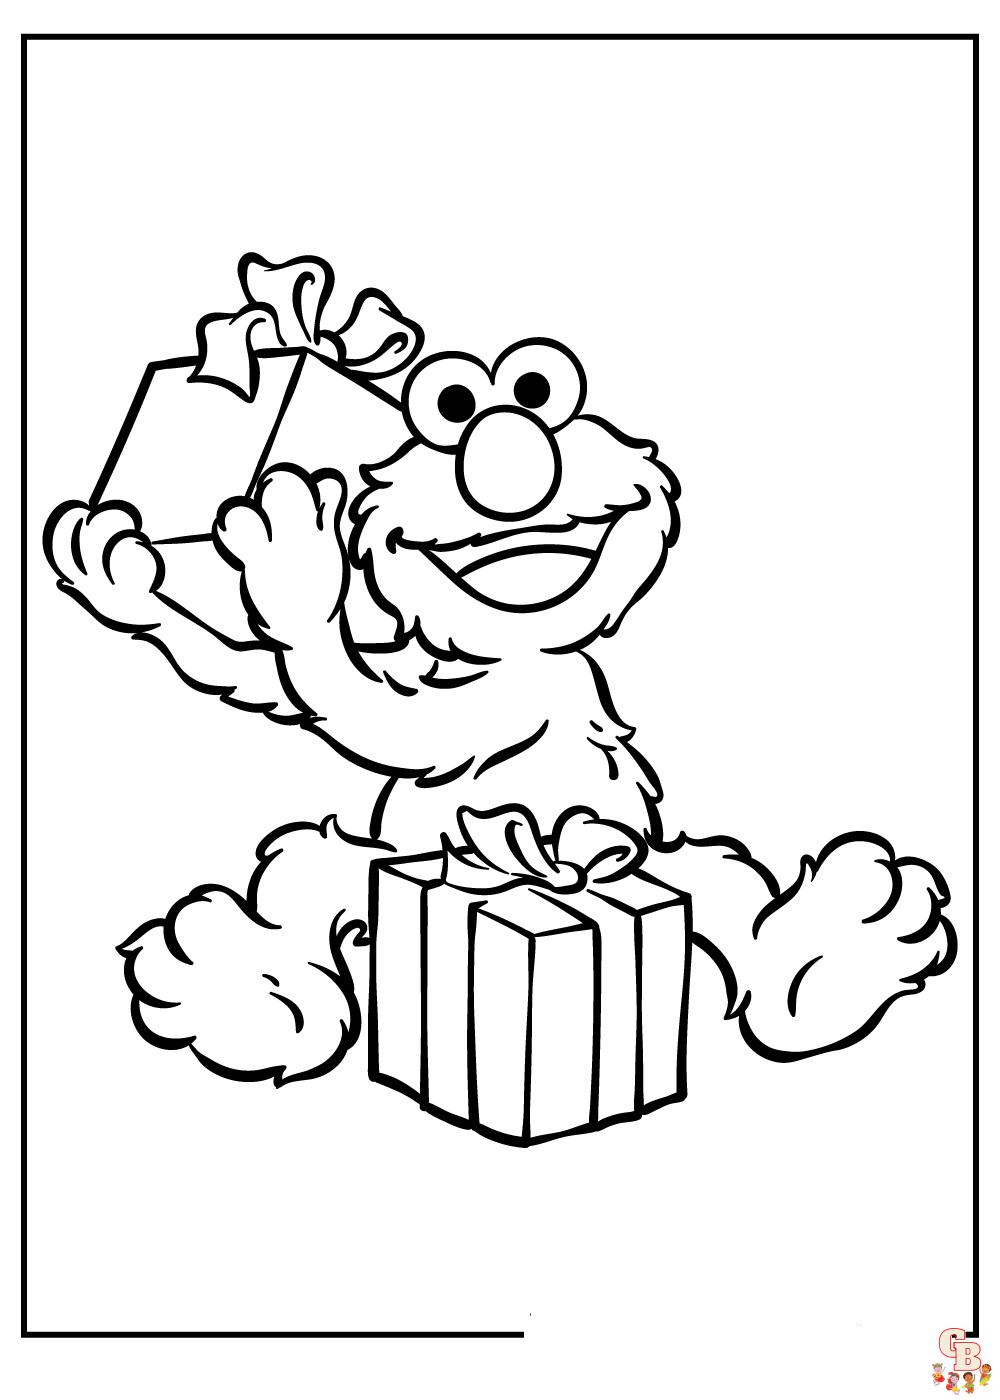 Sesame Street Coloring Pages 1